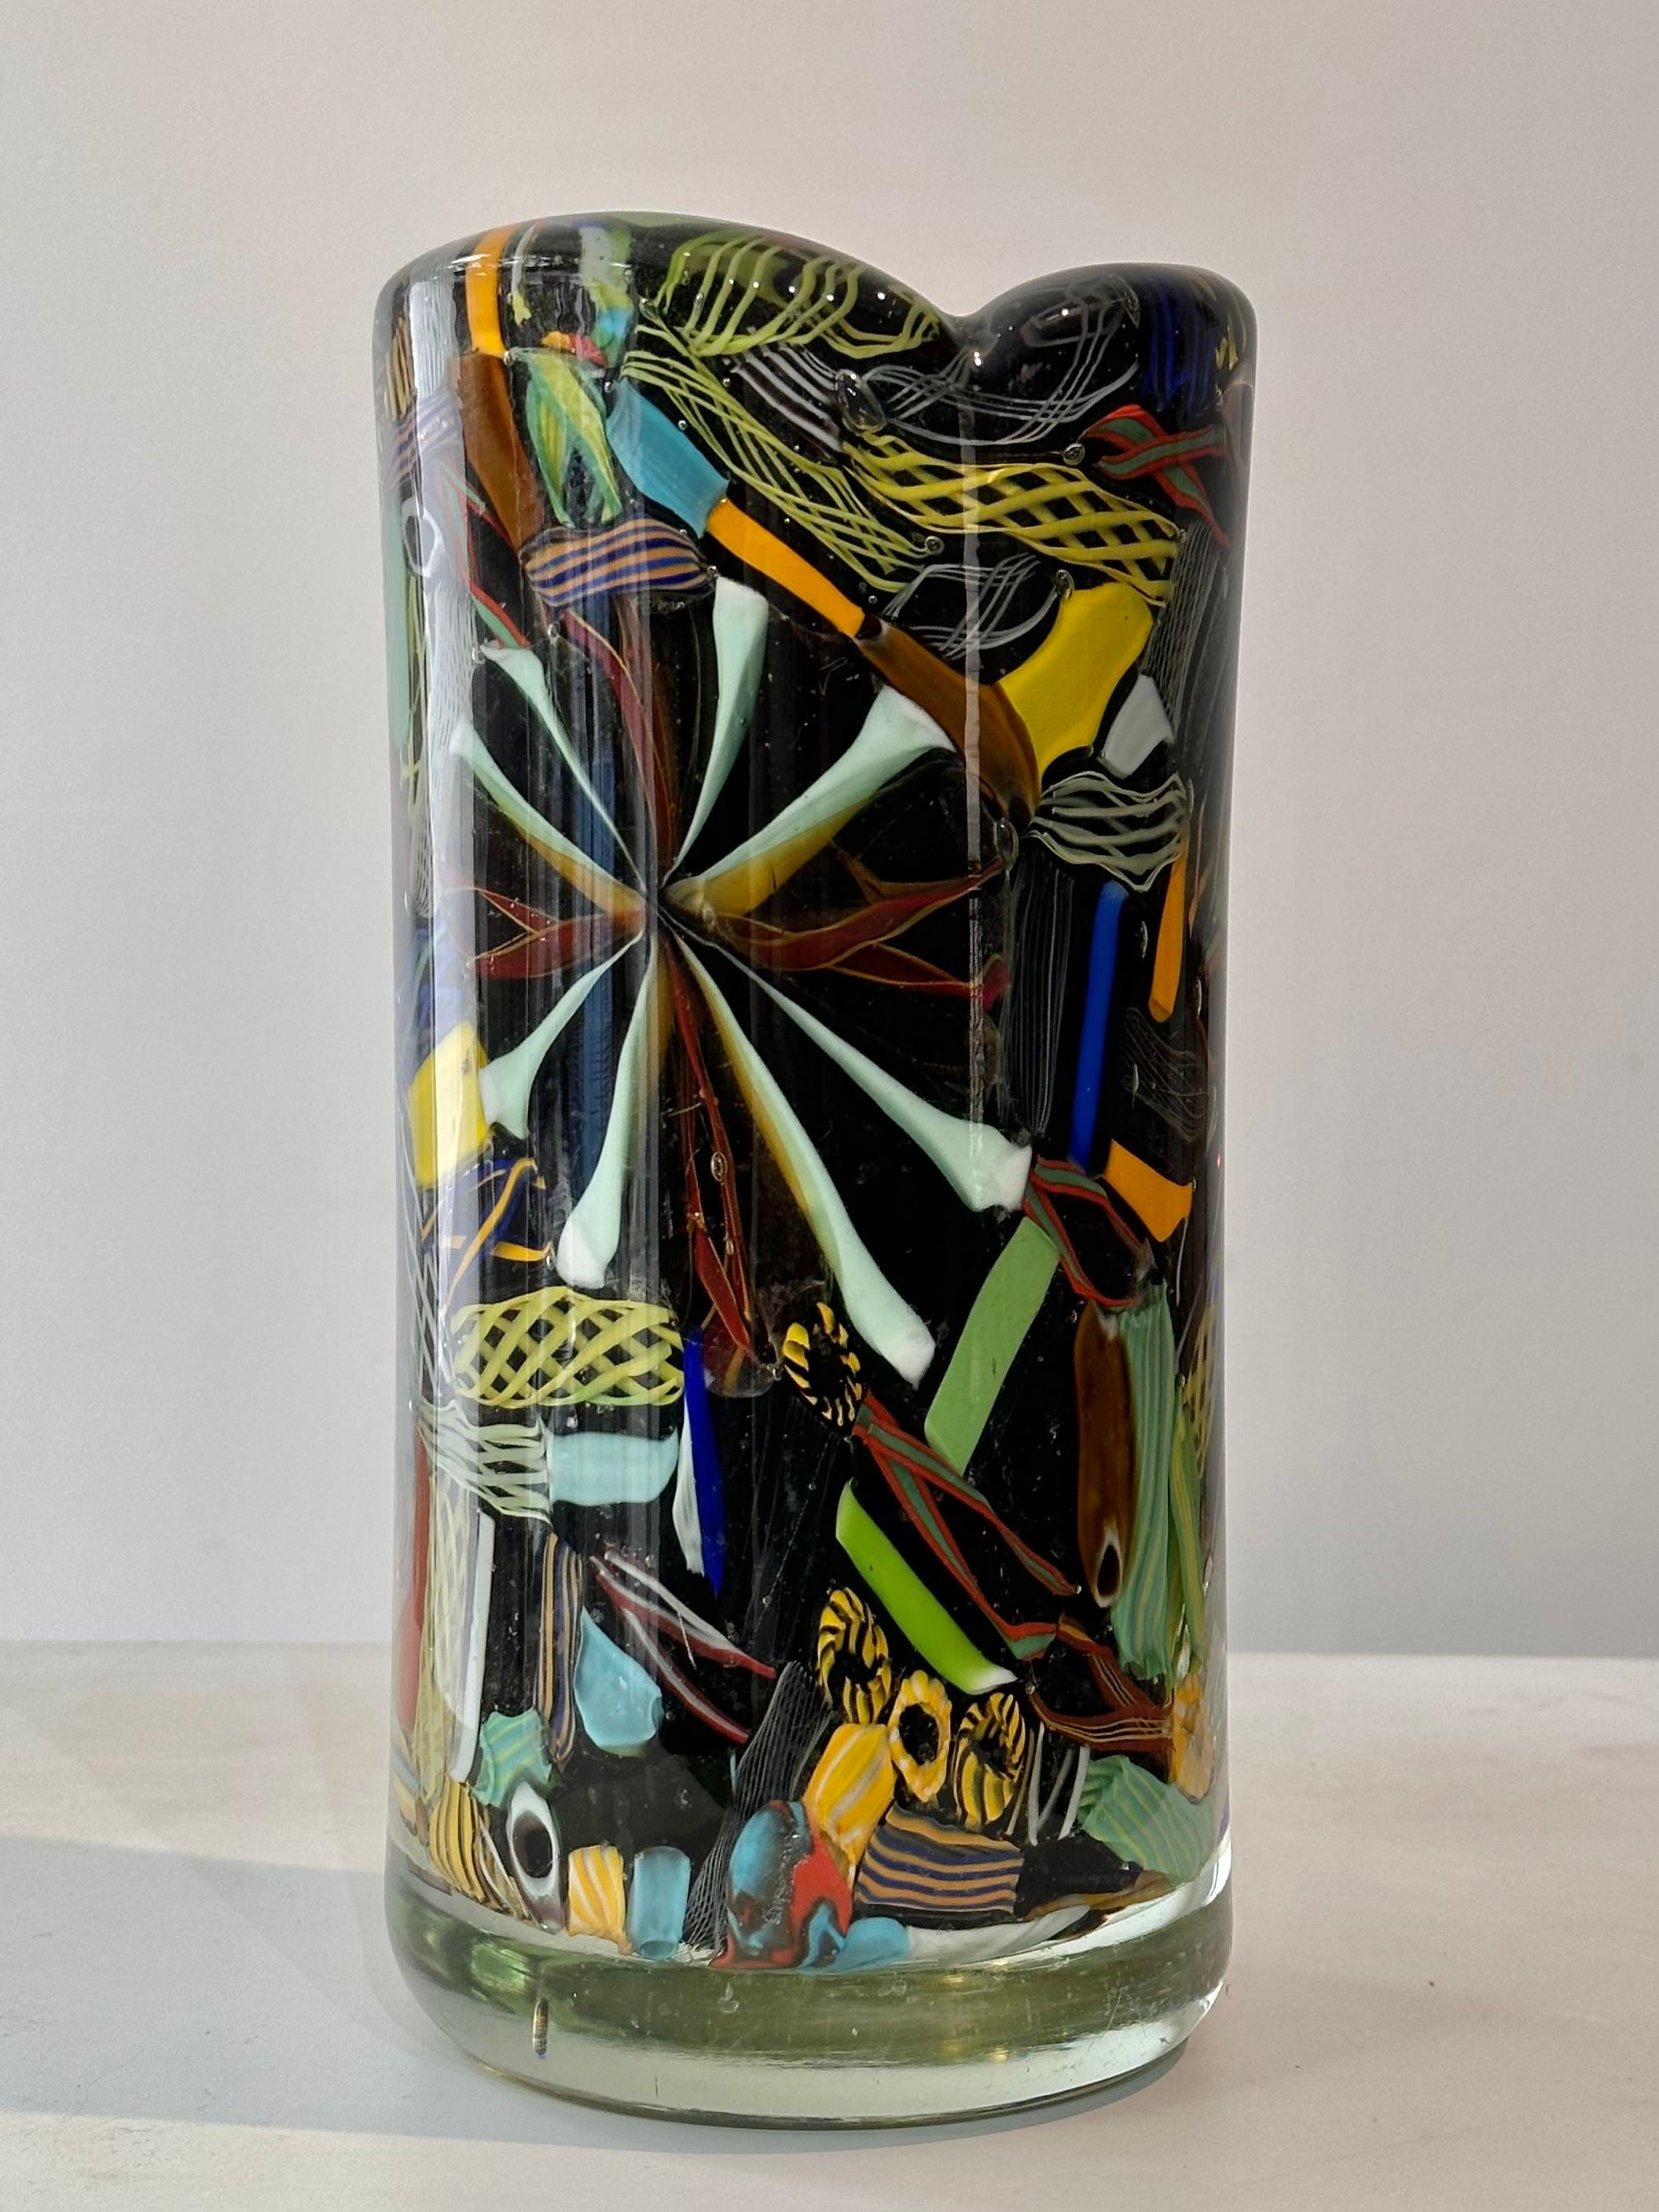 Vintage murano glass in the style of A.V.E.M. This vase is can be categorized as 